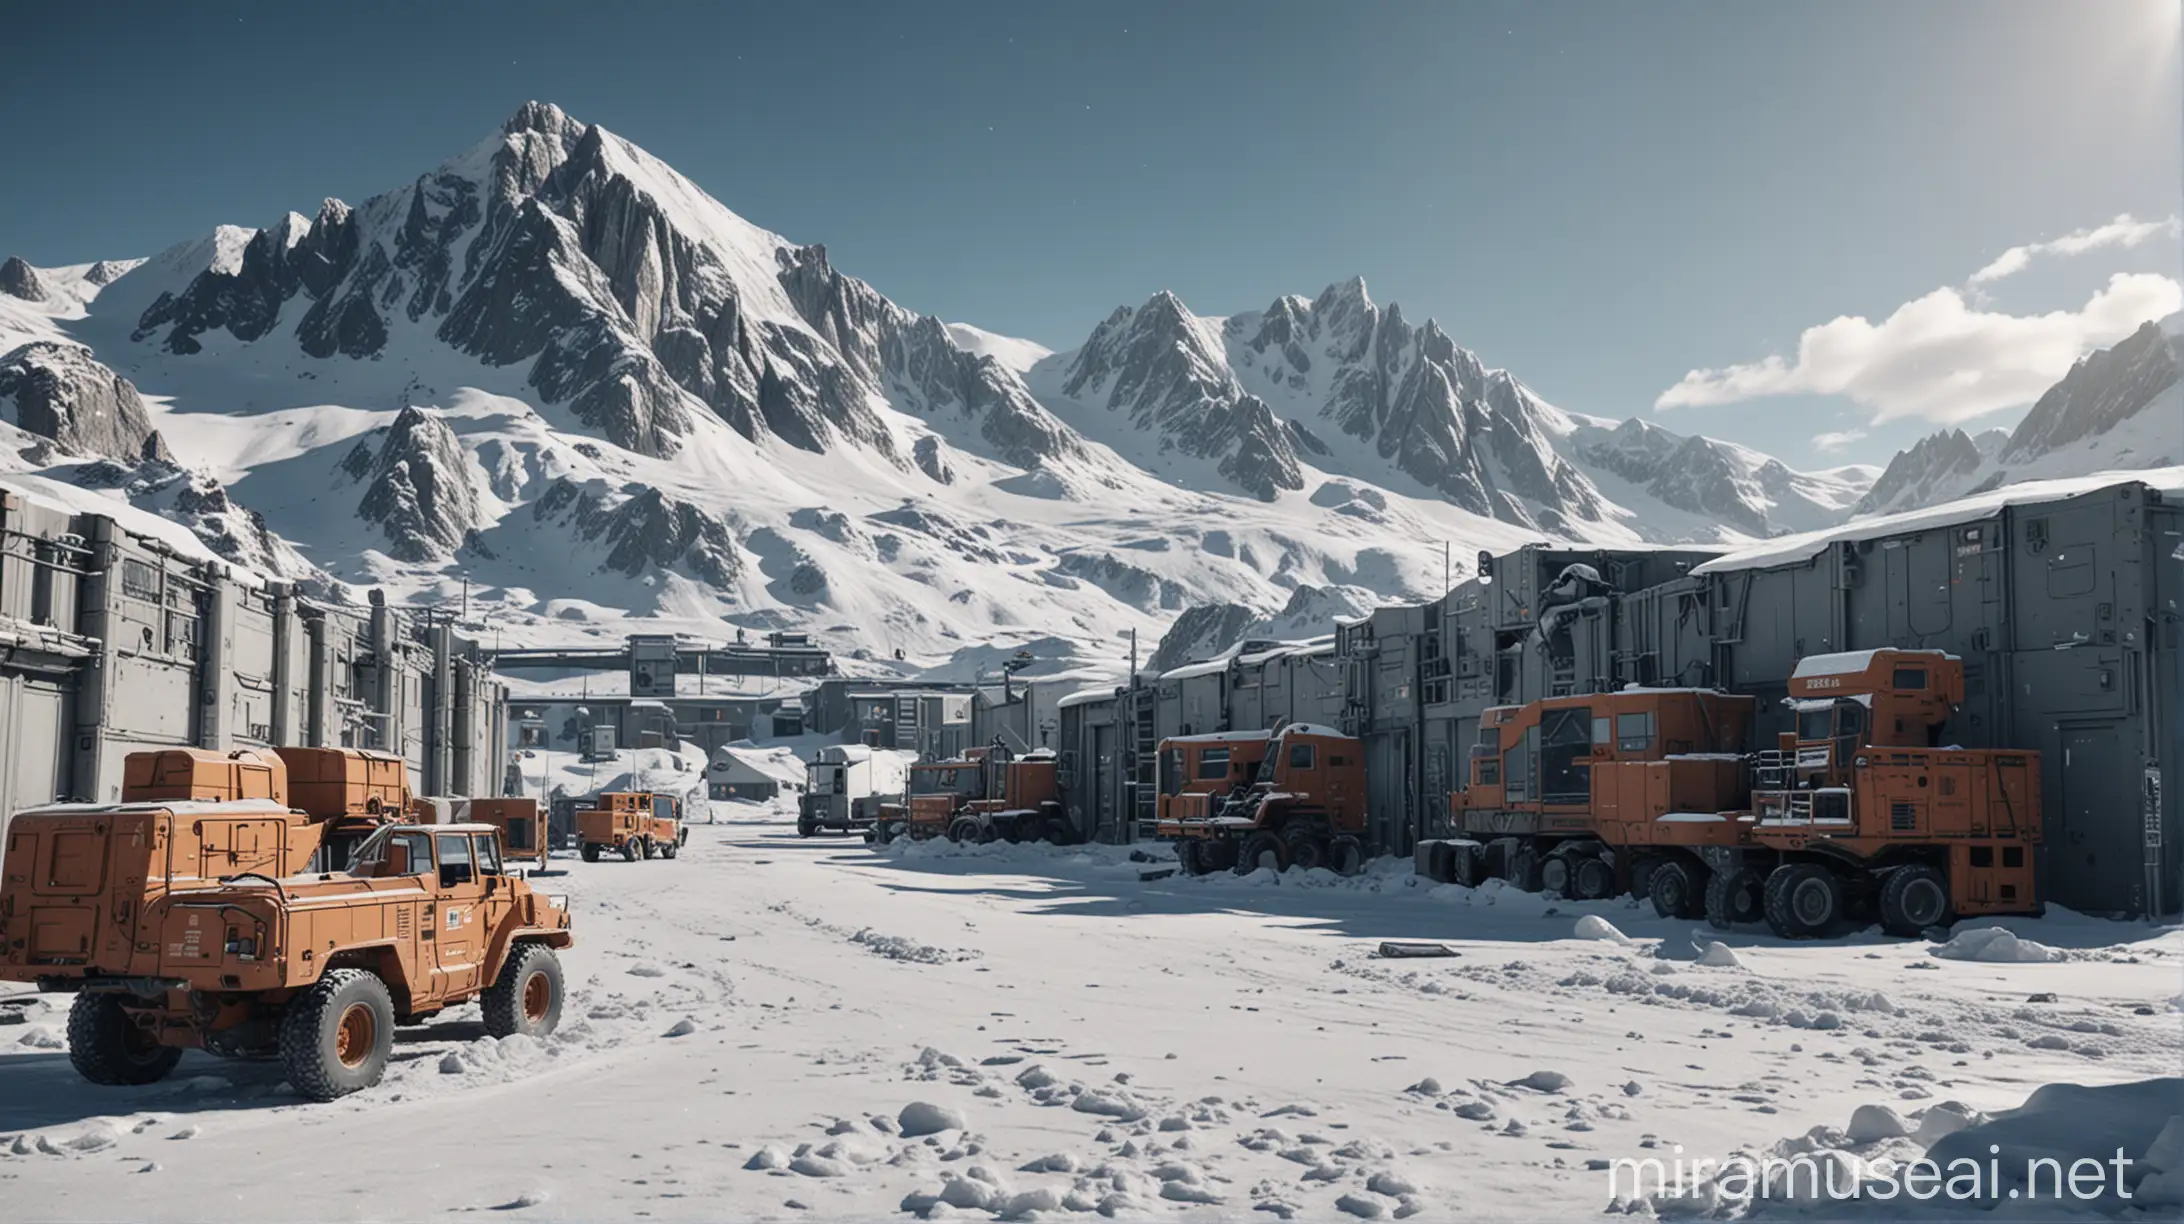 a pov of a slightly futuristic military base with a snow mountain in the background during day times, a few crates, trucks and one tank closer to the camera, a sci-fi vibe military building to the left with led light decoration with white lights, remove the character in the center but keep the ratio of everything else